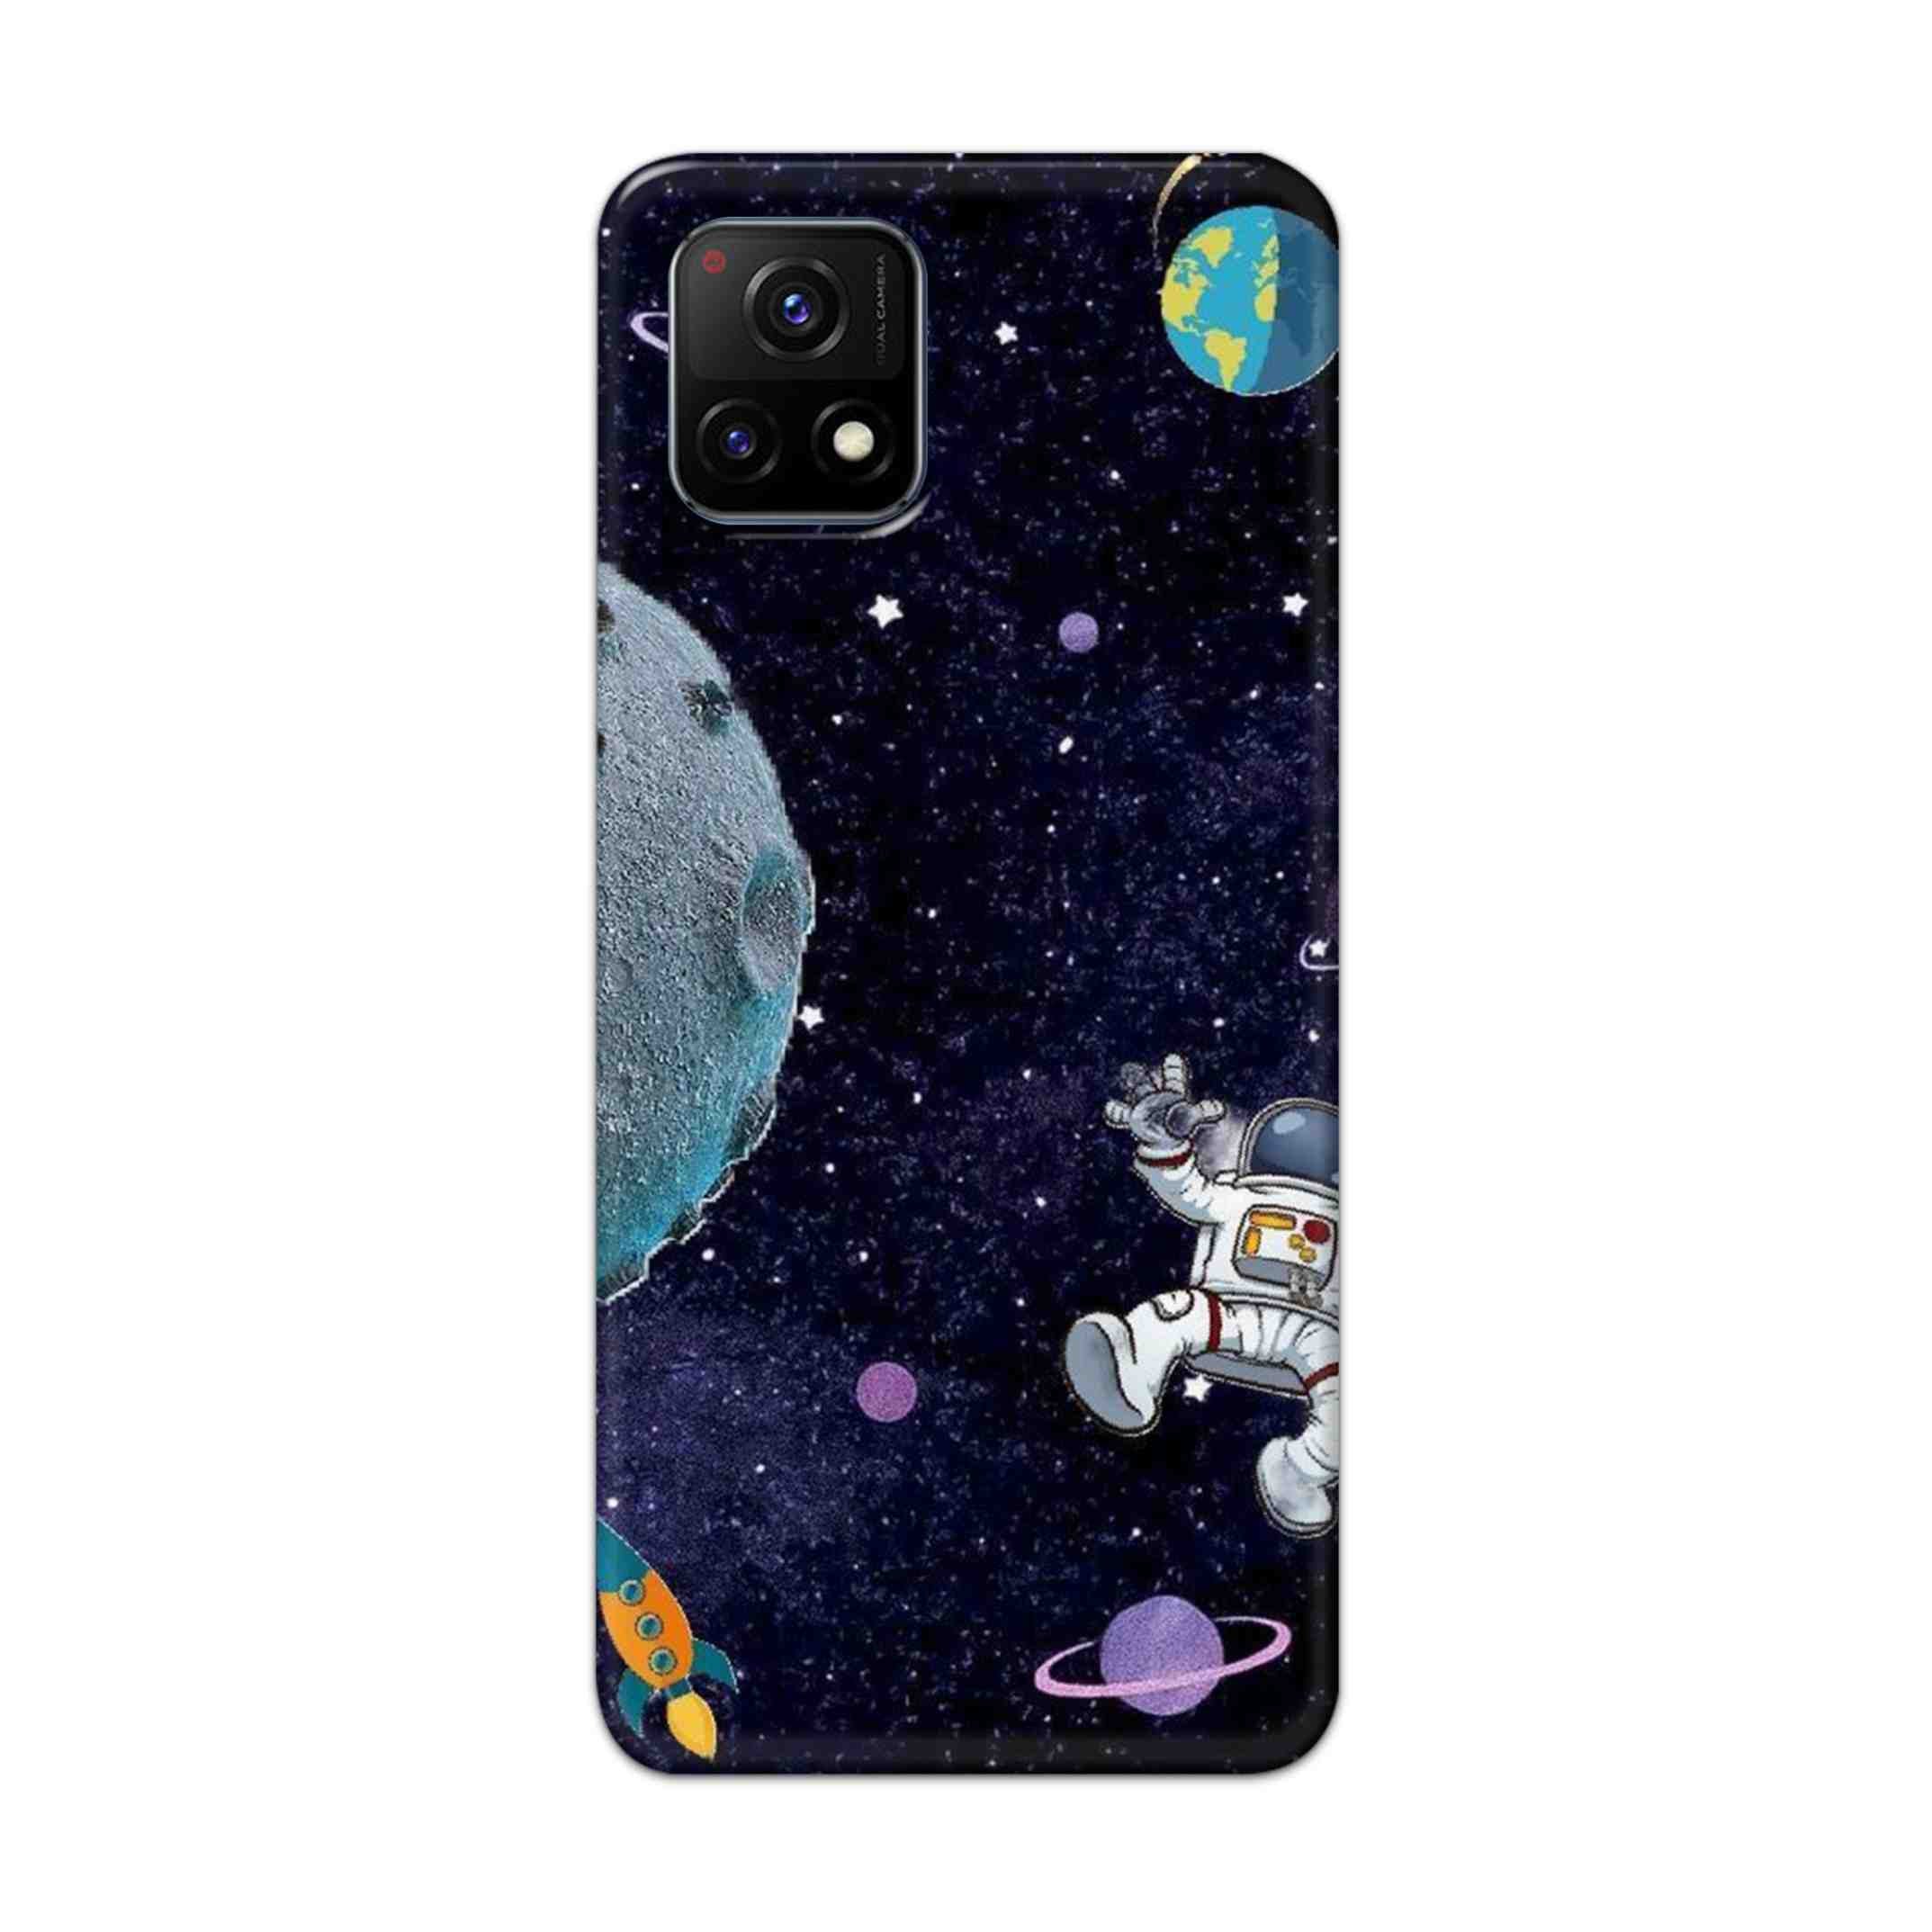 Buy Space Hard Back Mobile Phone Case Cover For Vivo Y72 5G Online